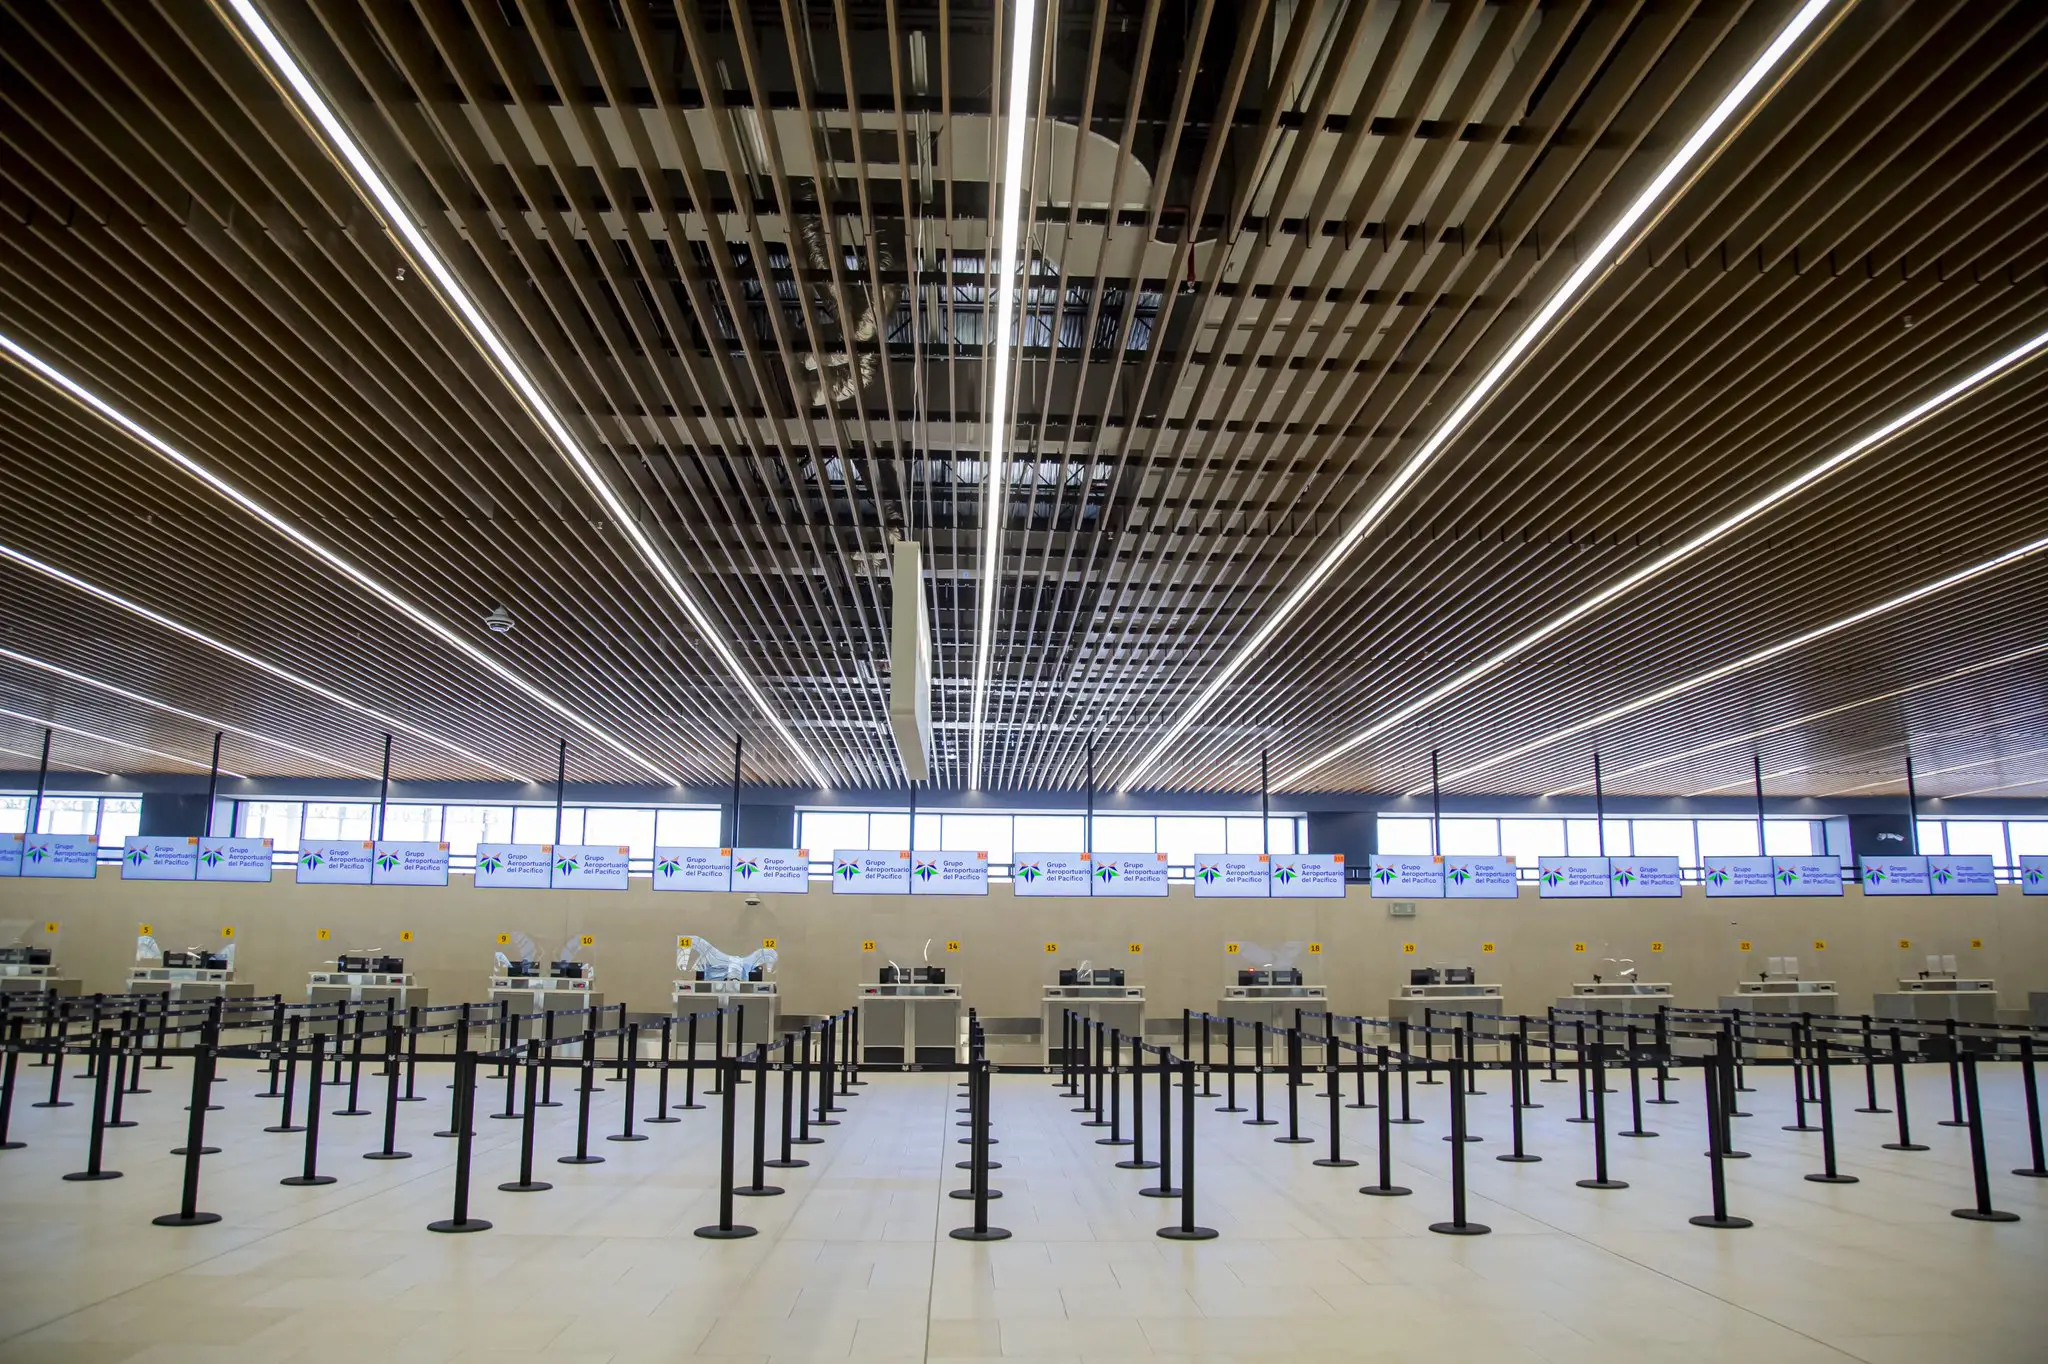 According to Governor Marina del Pilar Avila Olmeda, this airport "opens the door to the world for Tijuana to receive thousands of daily visitors, but also to have international flights." 